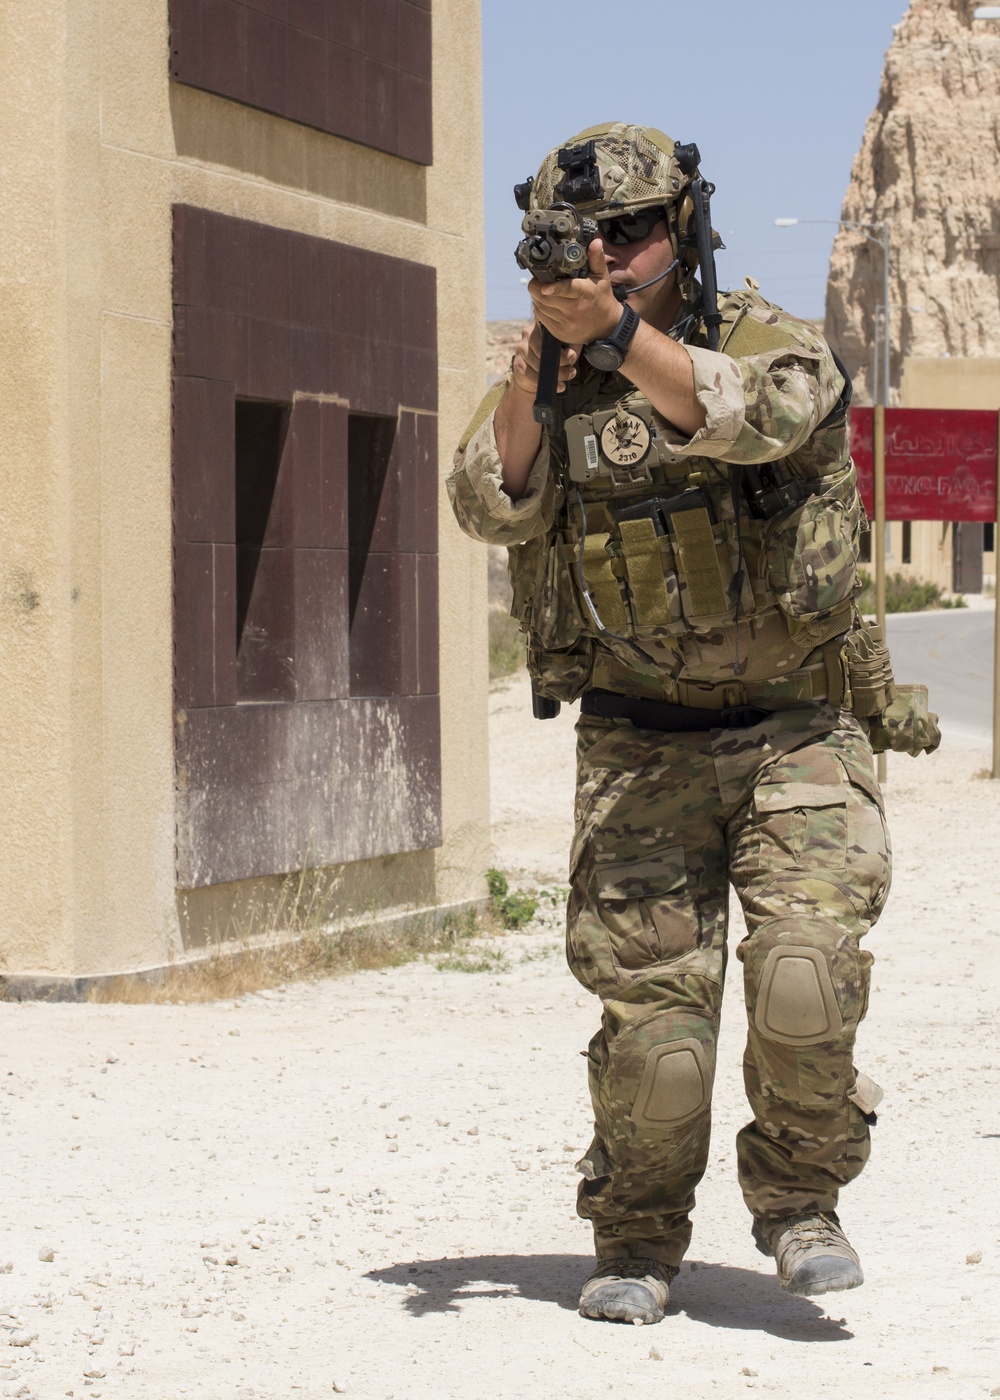 A member of the Air Force Special Operation's 23rd Special Tactics Squad participates in small unit tactics at the King Abdullah II Special Operations Training Center in Amman, Jordan during Eager Lion 2017.